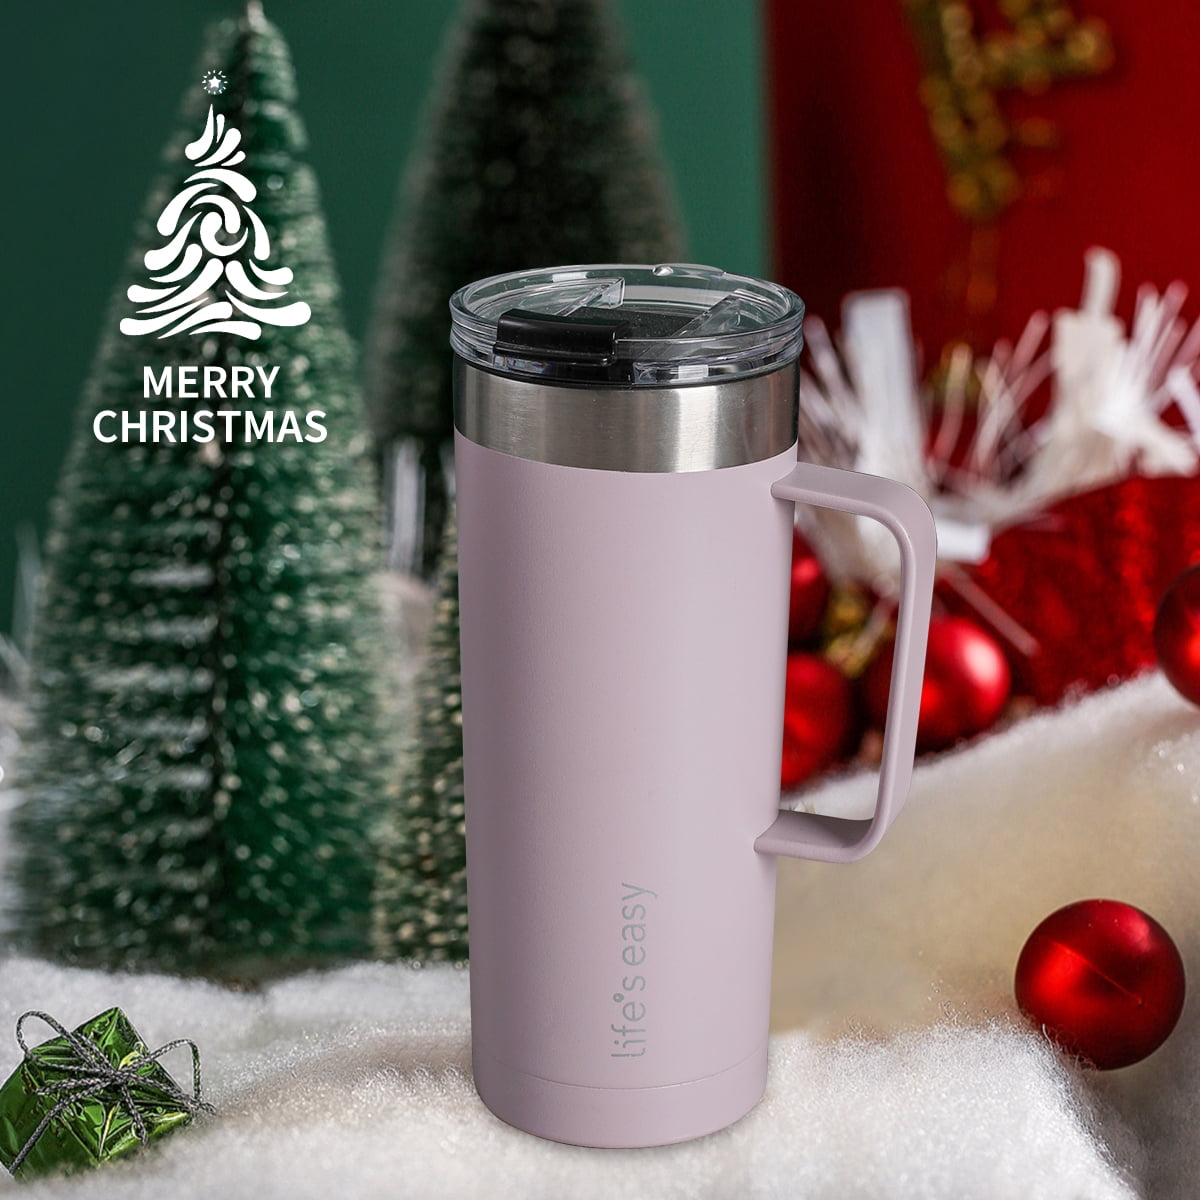 Lifes Easy - Stainless Steel Mug with Handle, Vacuum Insulated Mug for Hot and Cold Drink, Leak-Proof, Spill-Proof, Blue, 20 oz